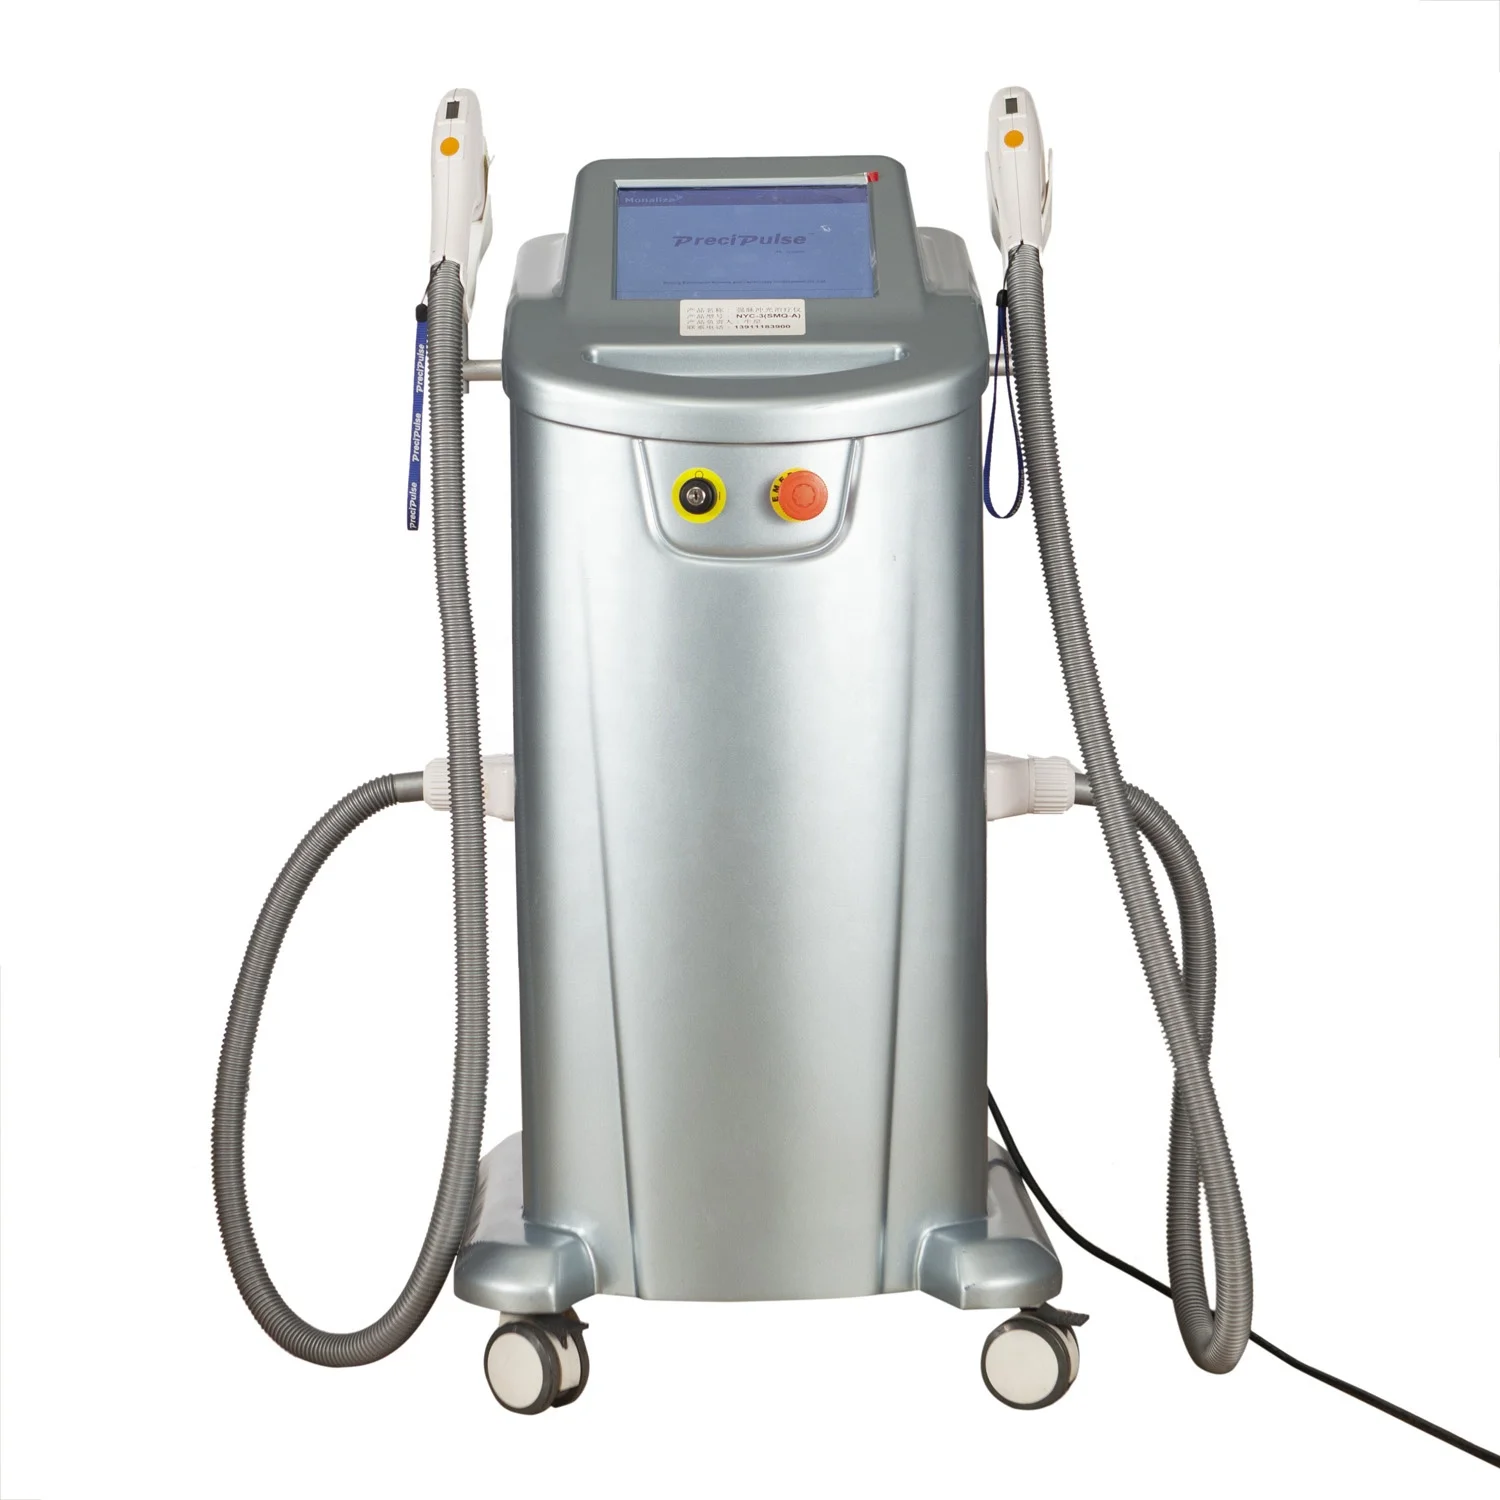 

2022 Beauty Cilinic Sincoheren Vertical IPL SHR 2 Handles Laser Hair Removal Skin Rejuvenation CE Approved Factory Price